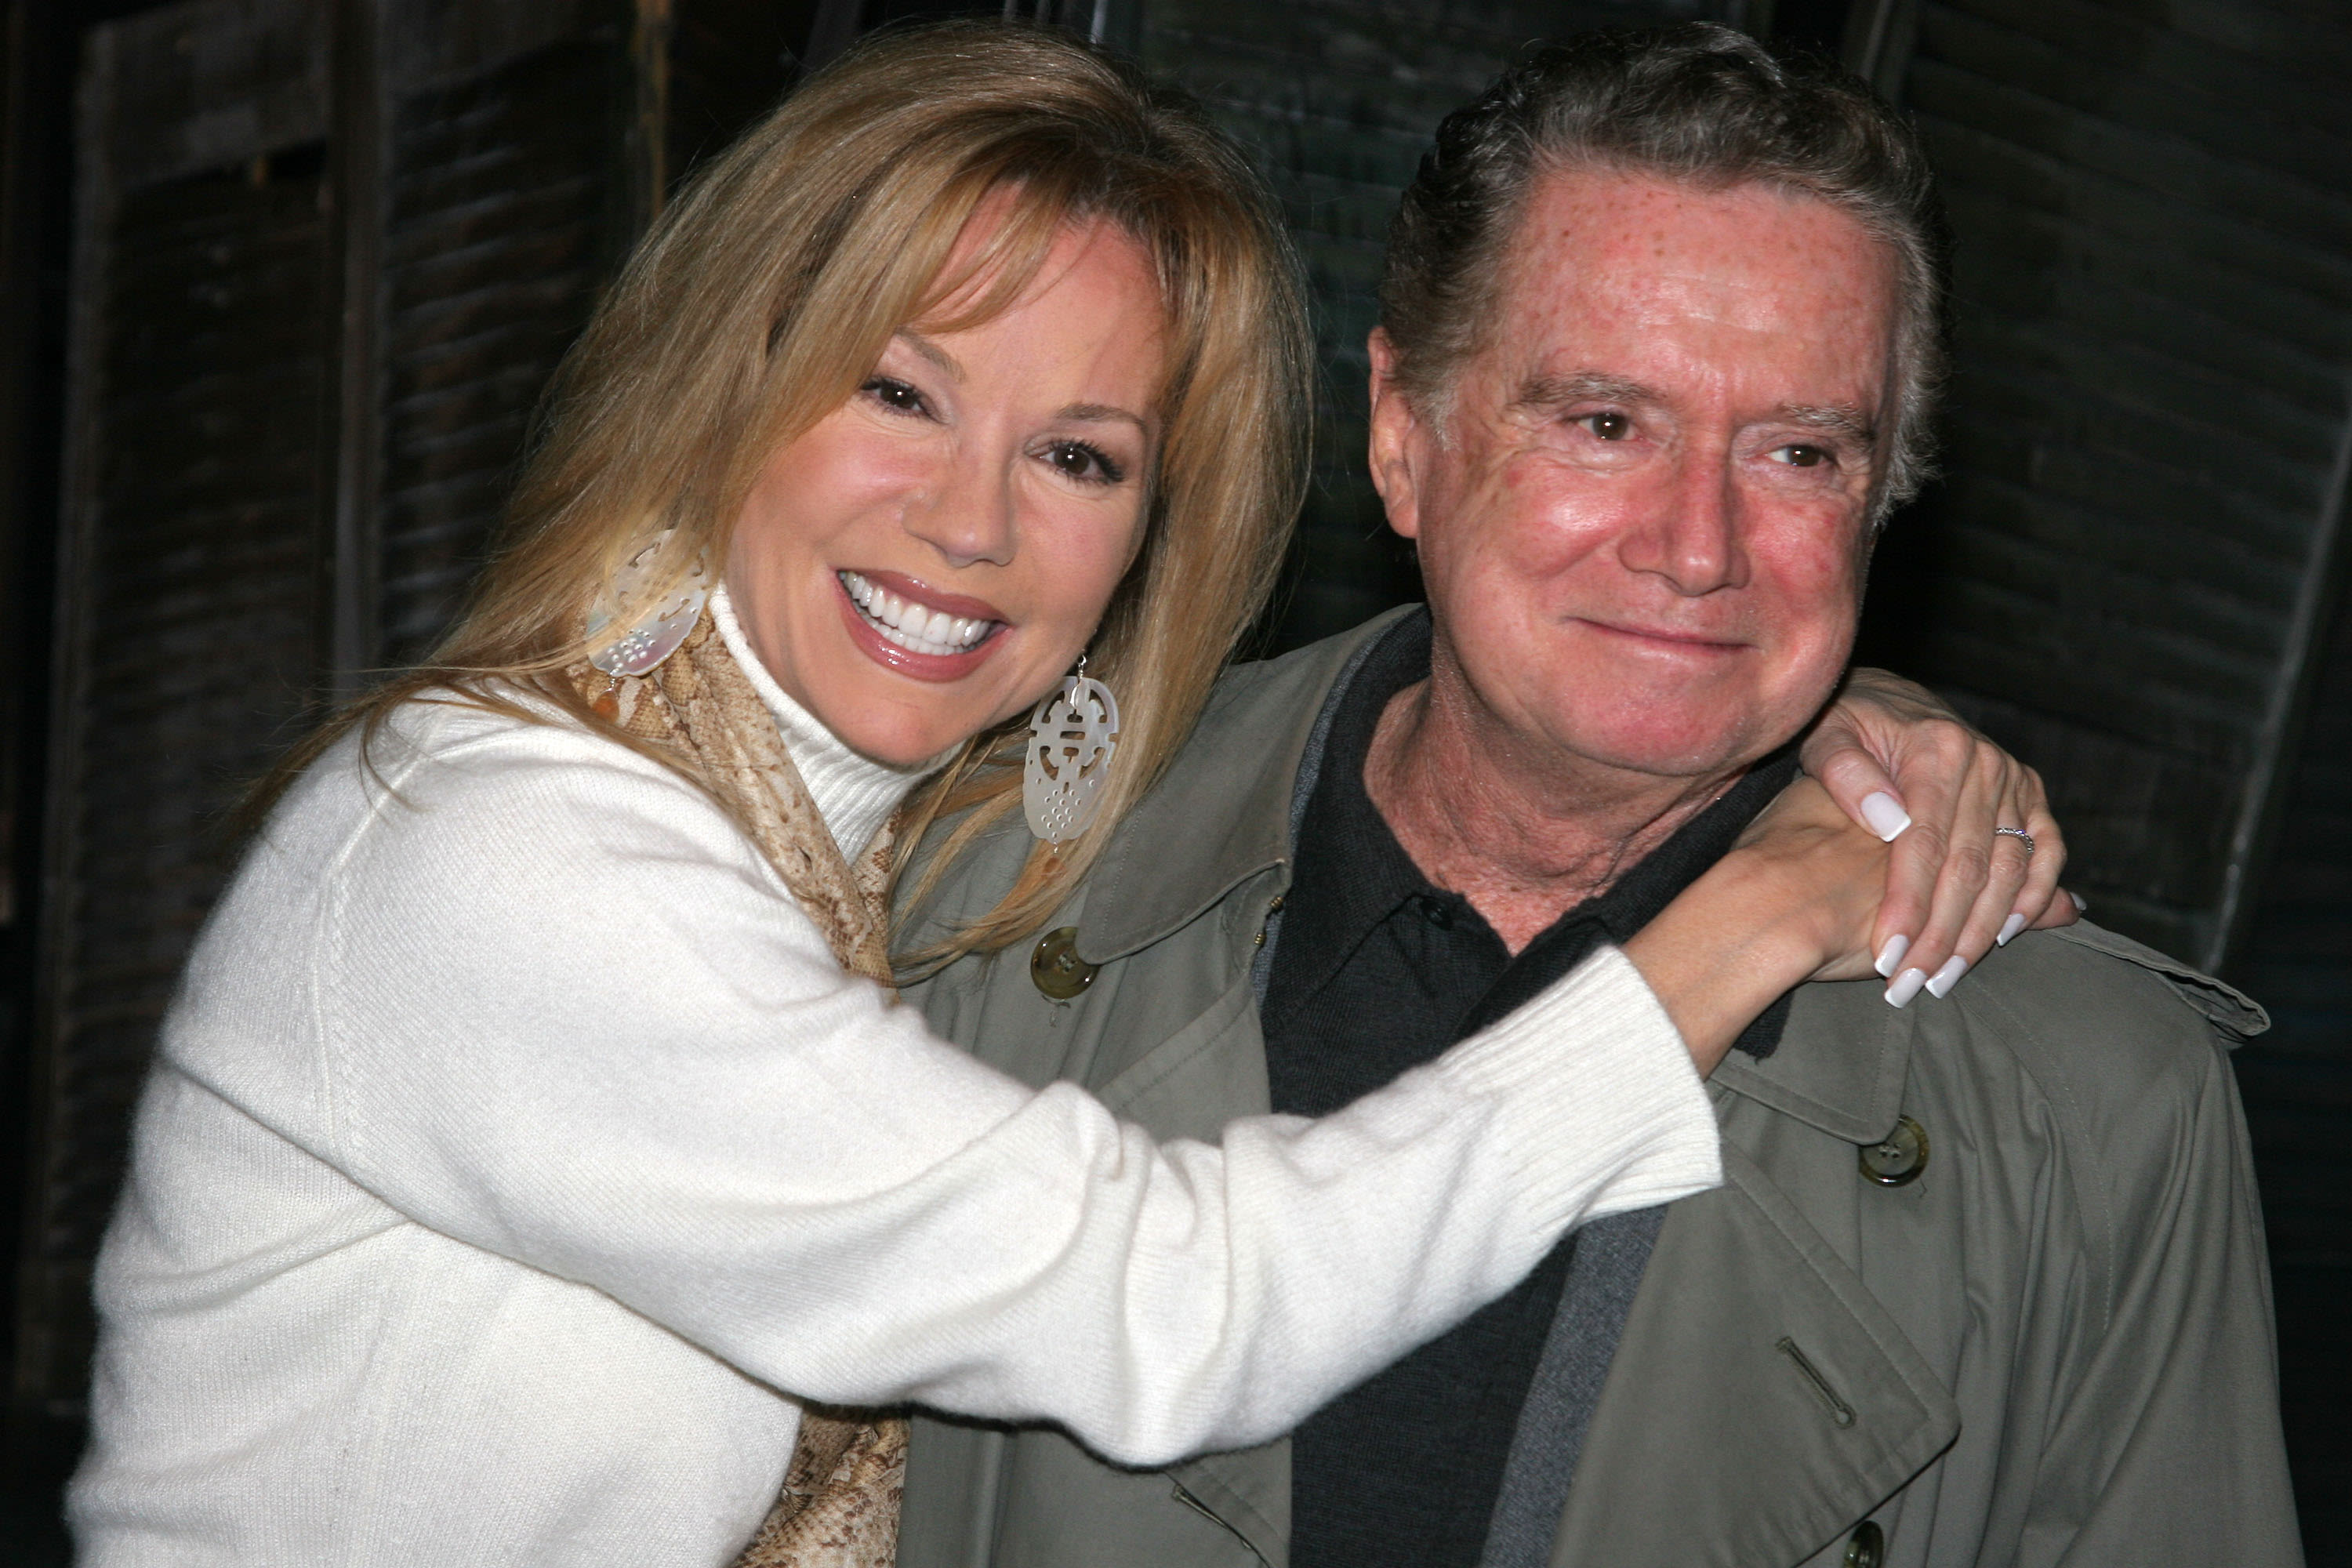 Kathie Lee Gifford Reflects on Working With Regis Philbin on ‘Live! With Regis and Kathie Lee’